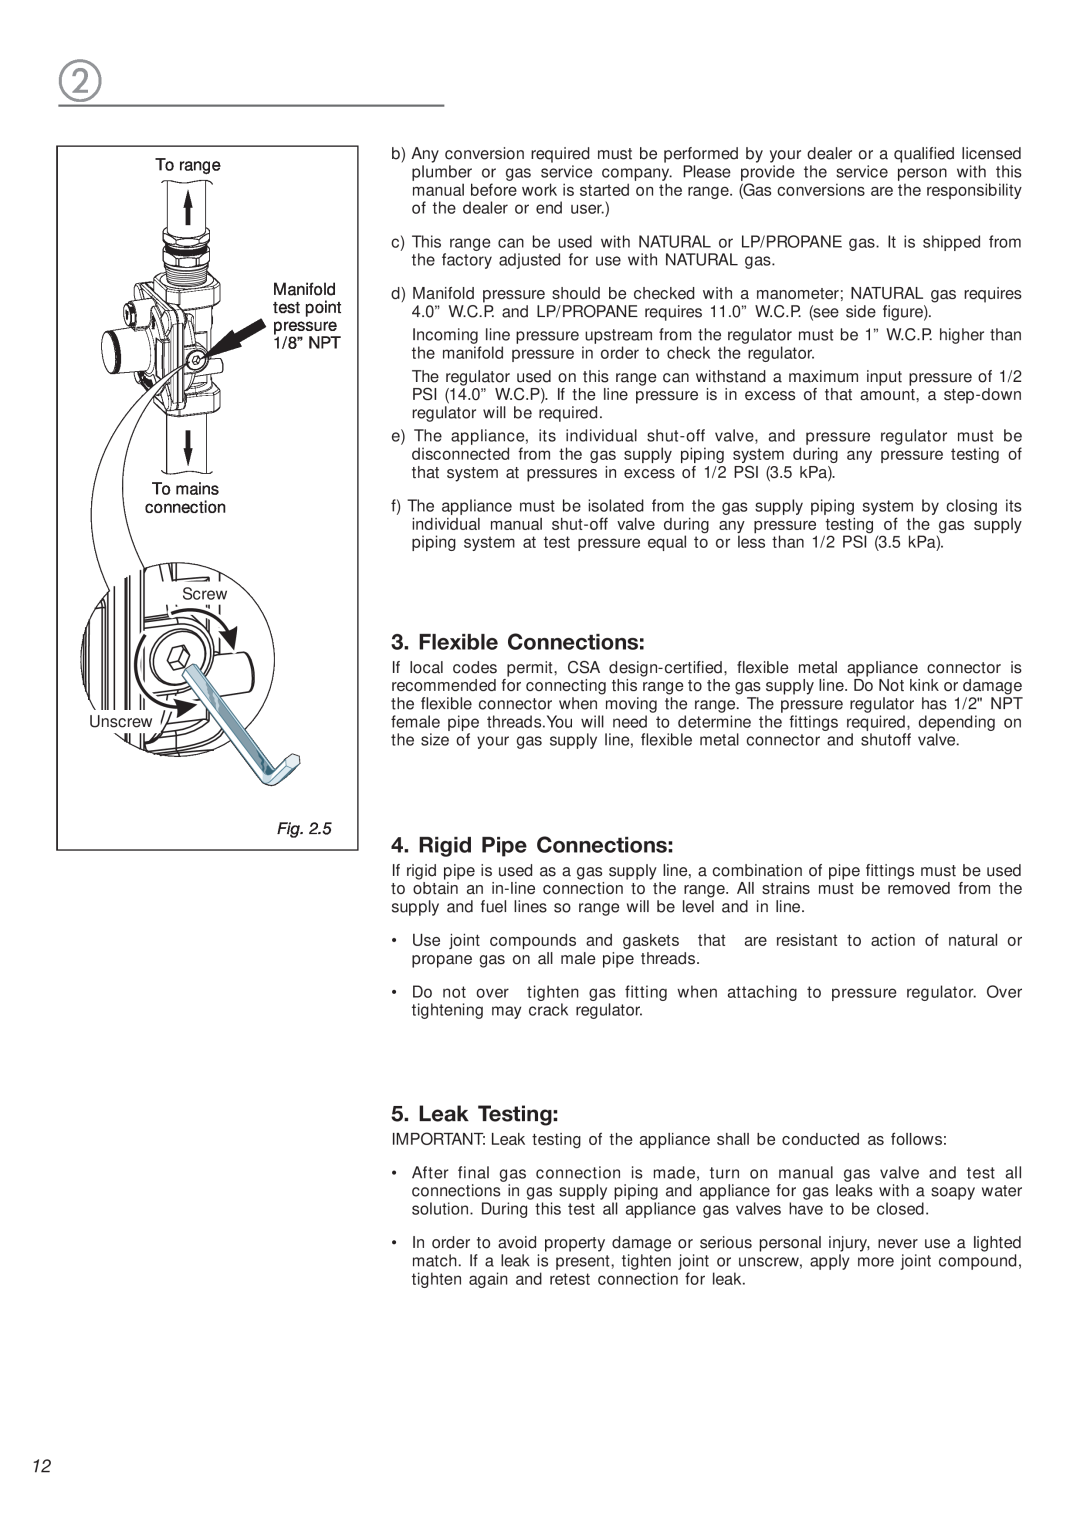 DeLonghi DEFSGG 24 SS installation instructions Flexible Connections, Rigid Pipe Connections, Leak Testing 